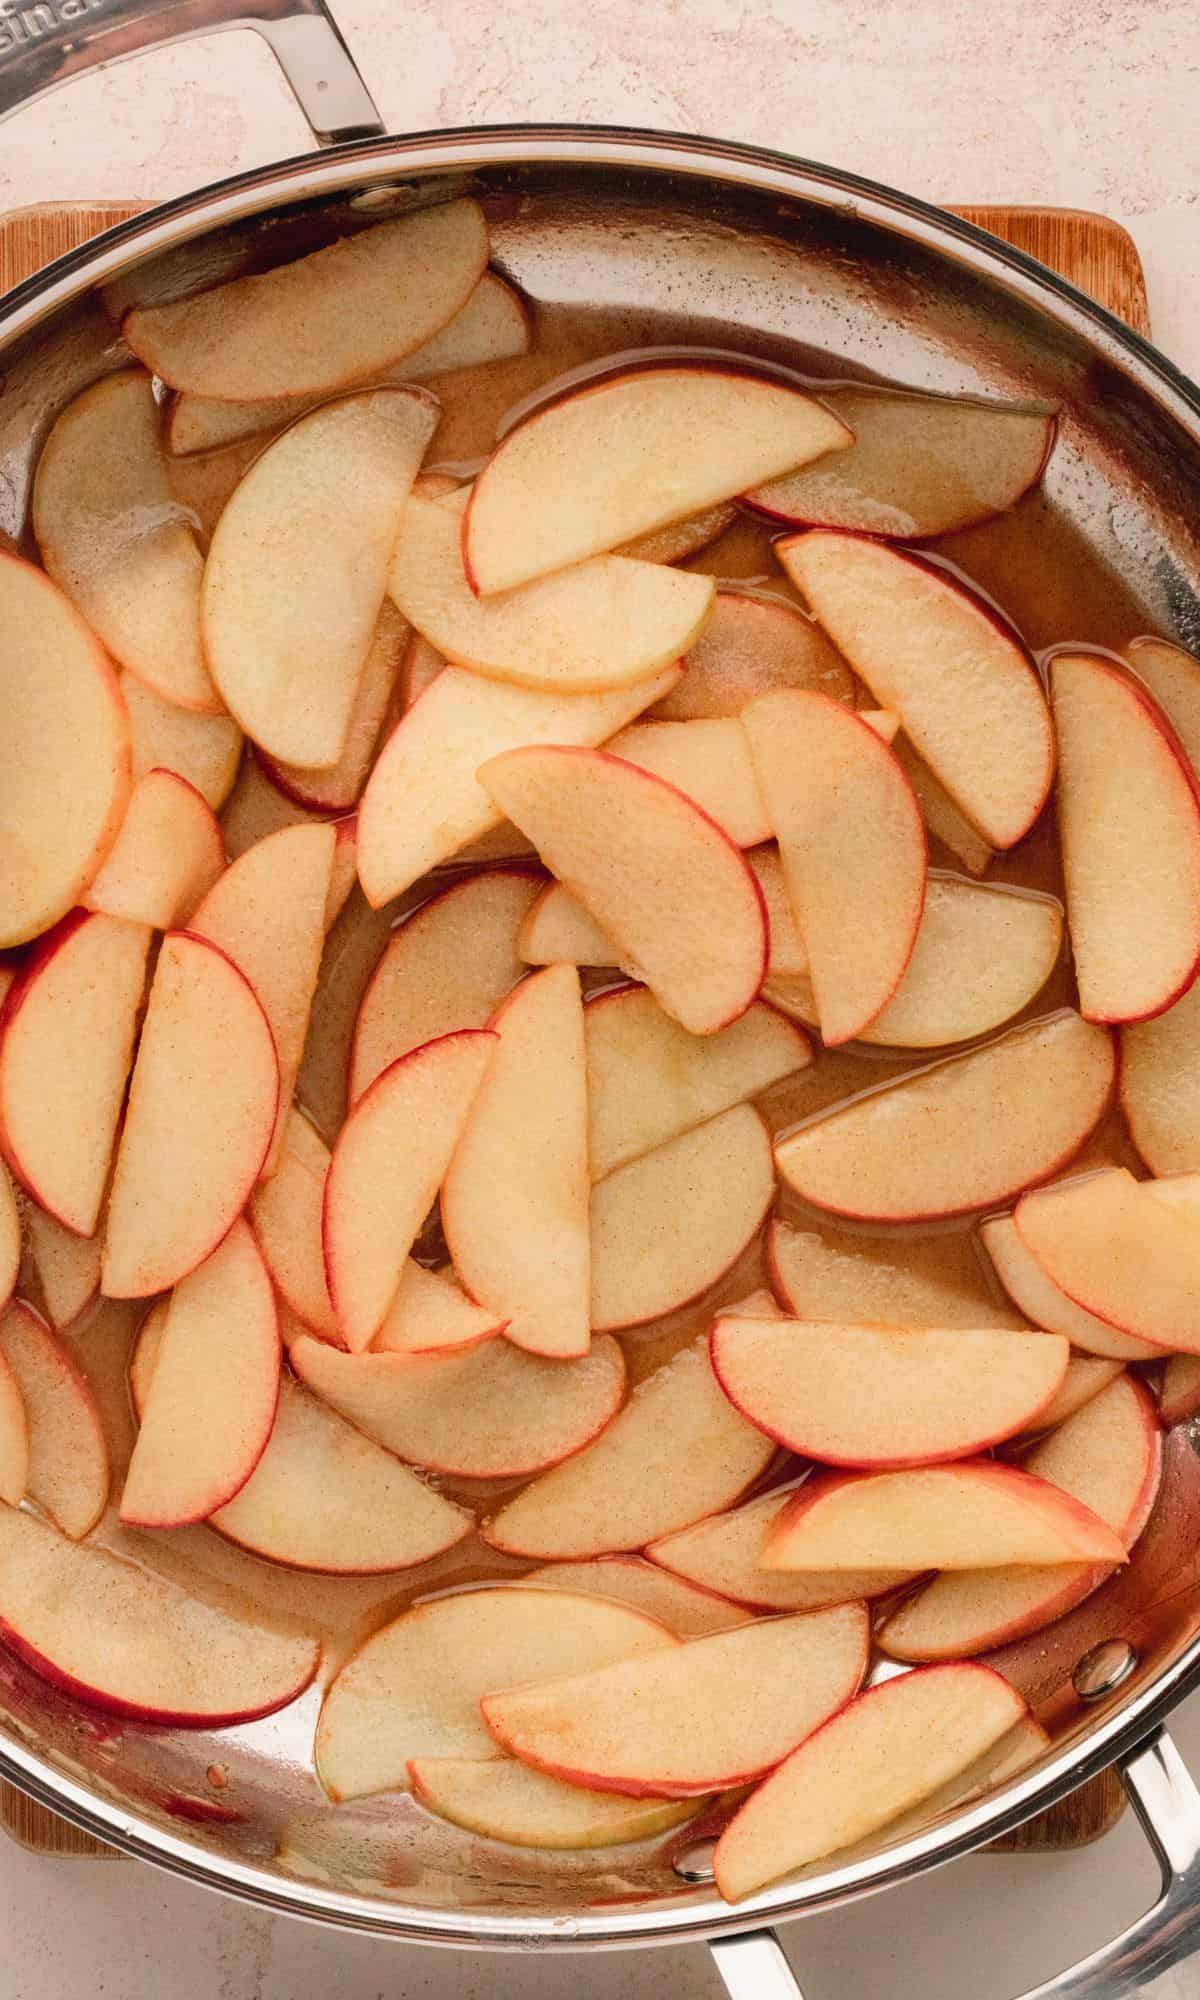 Apples in a large frying pan.